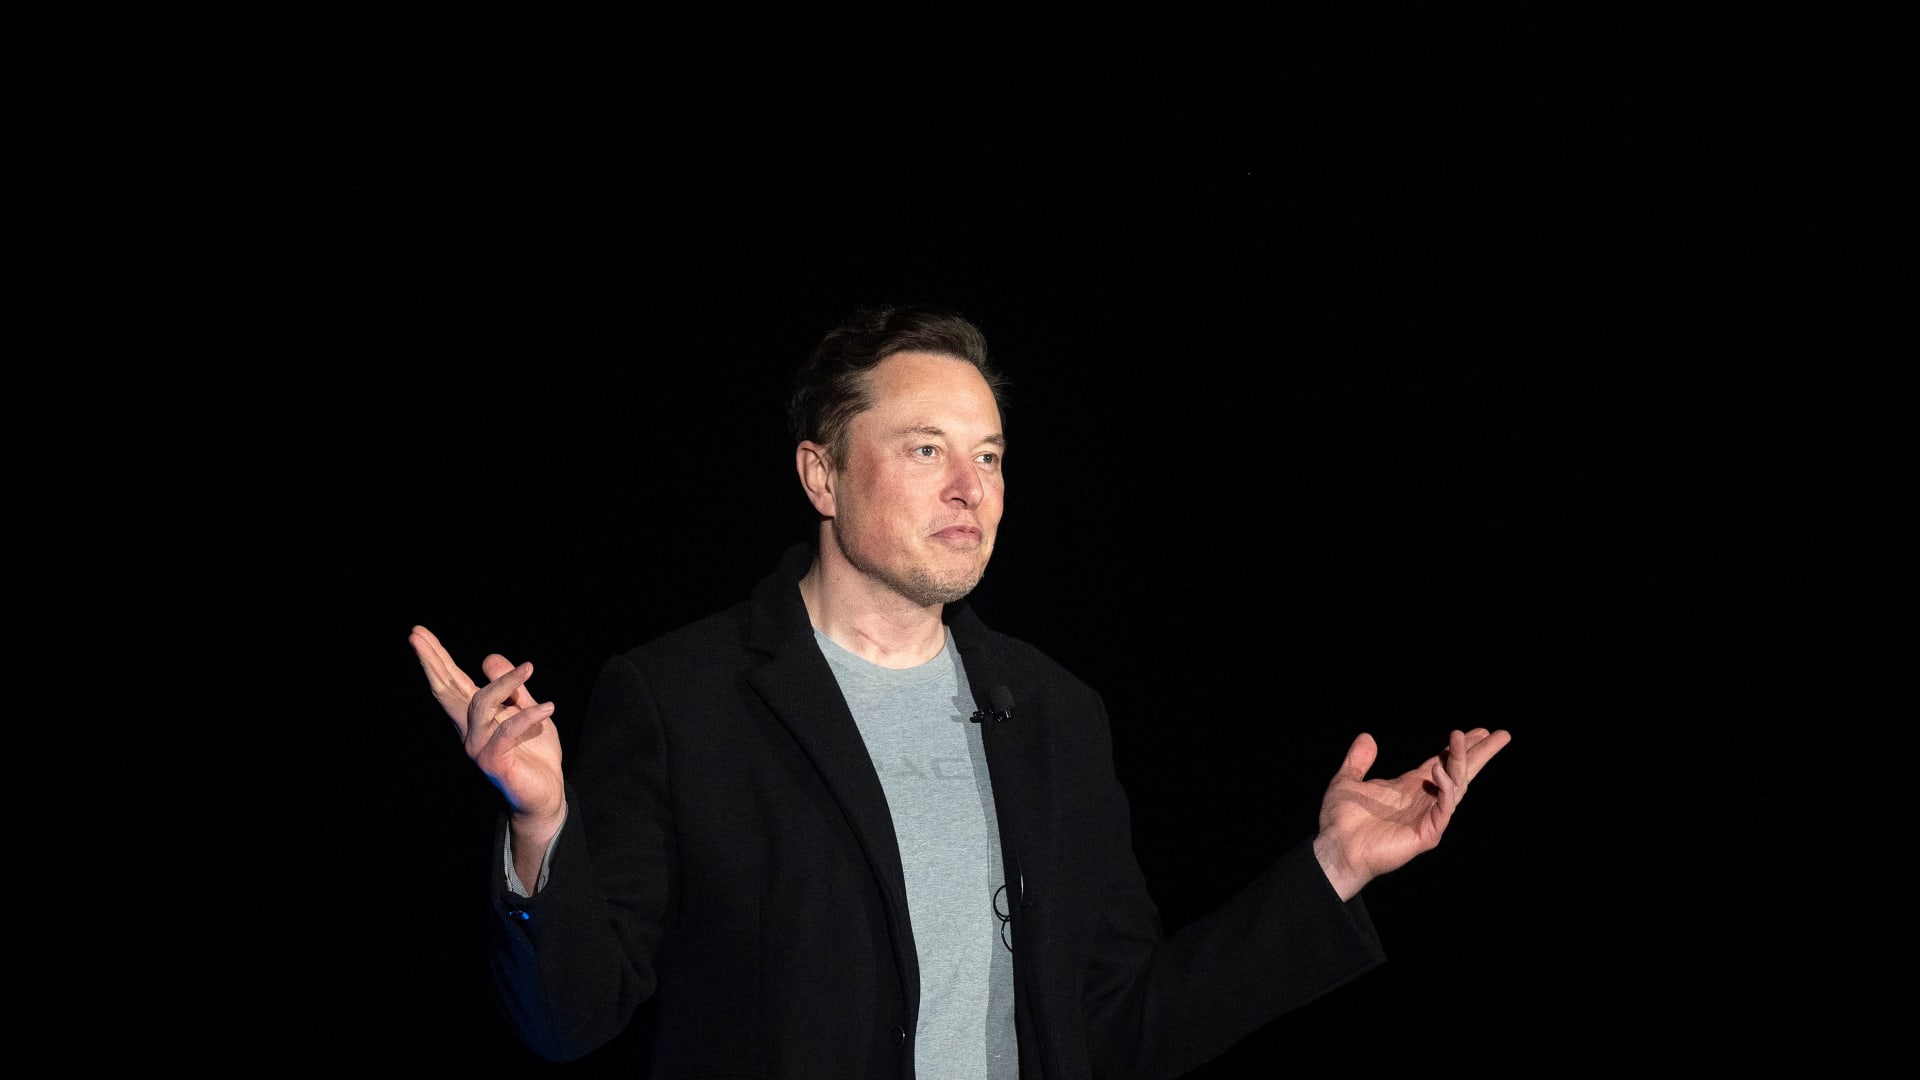 'The most dumb thing': Elon Musk dismisses hydrogen as tool for energy storage